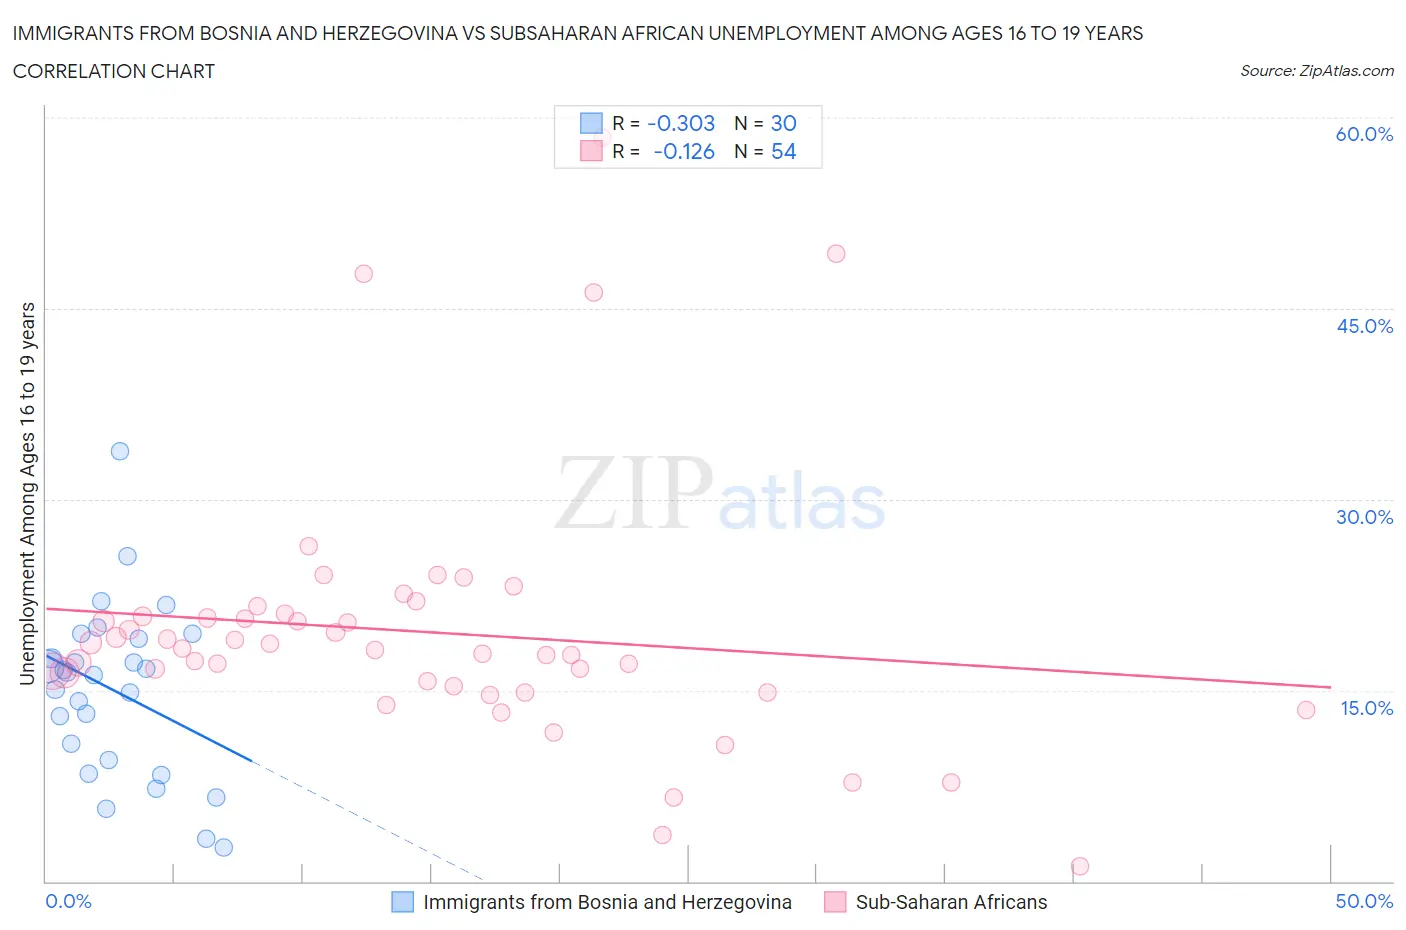 Immigrants from Bosnia and Herzegovina vs Subsaharan African Unemployment Among Ages 16 to 19 years